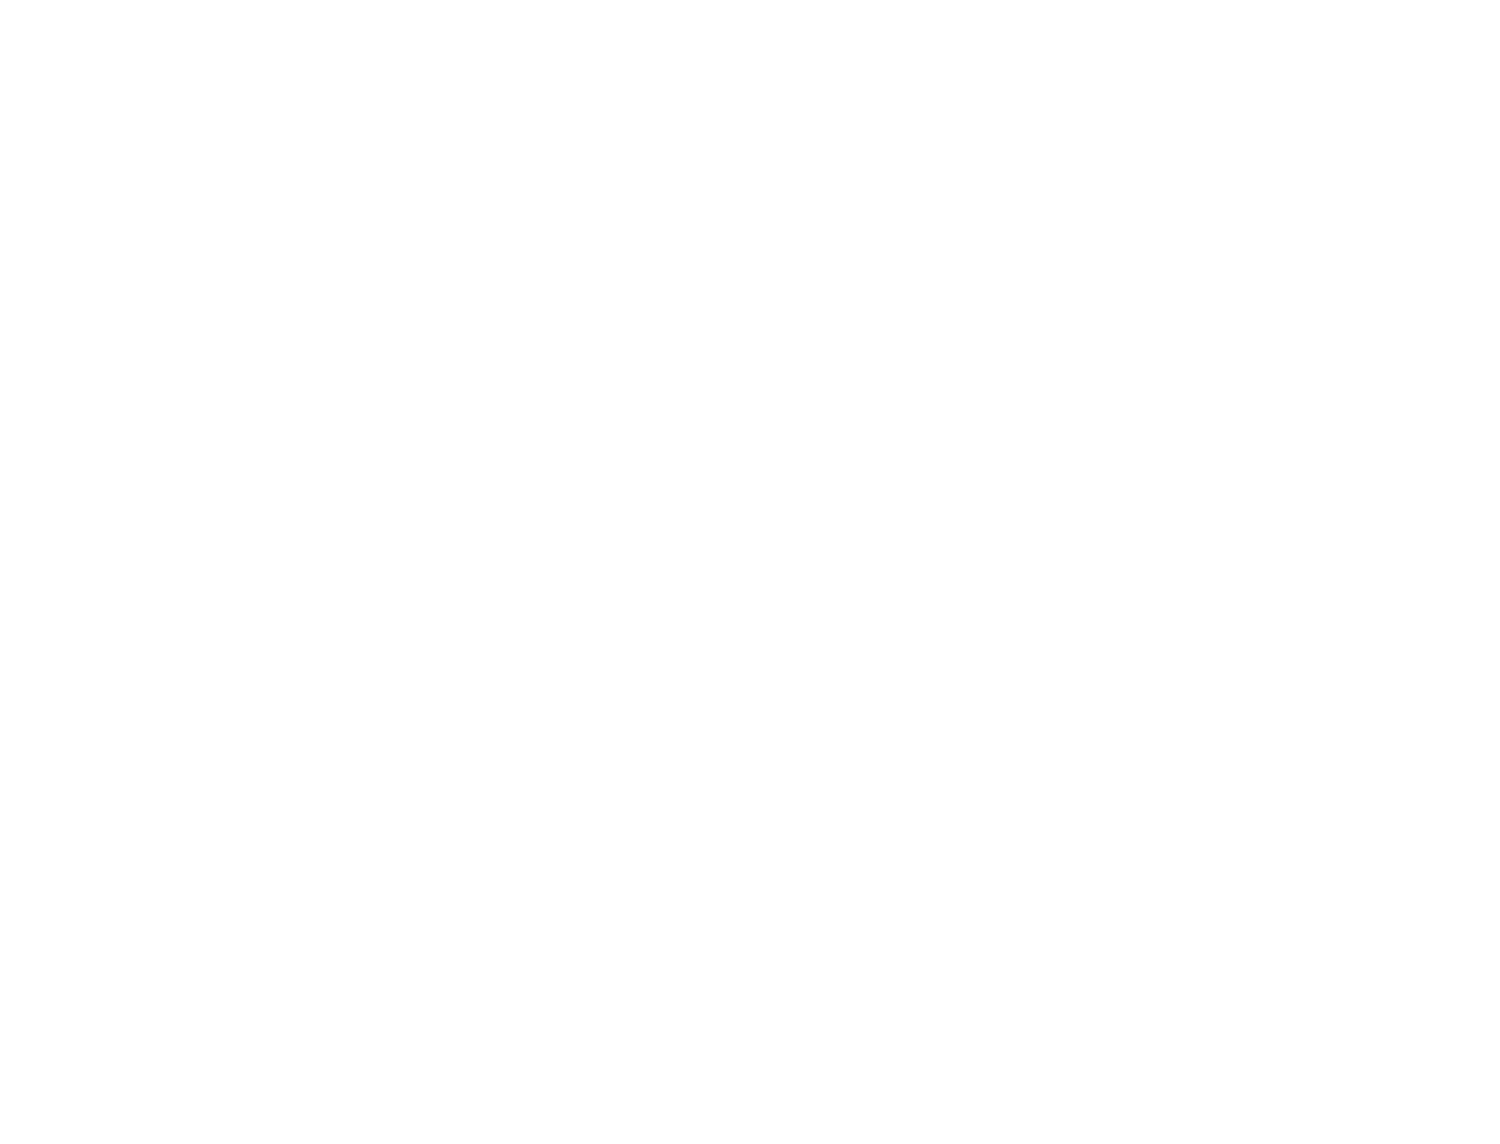 daniel&#39;s project - Training, Learning &amp; Exploration